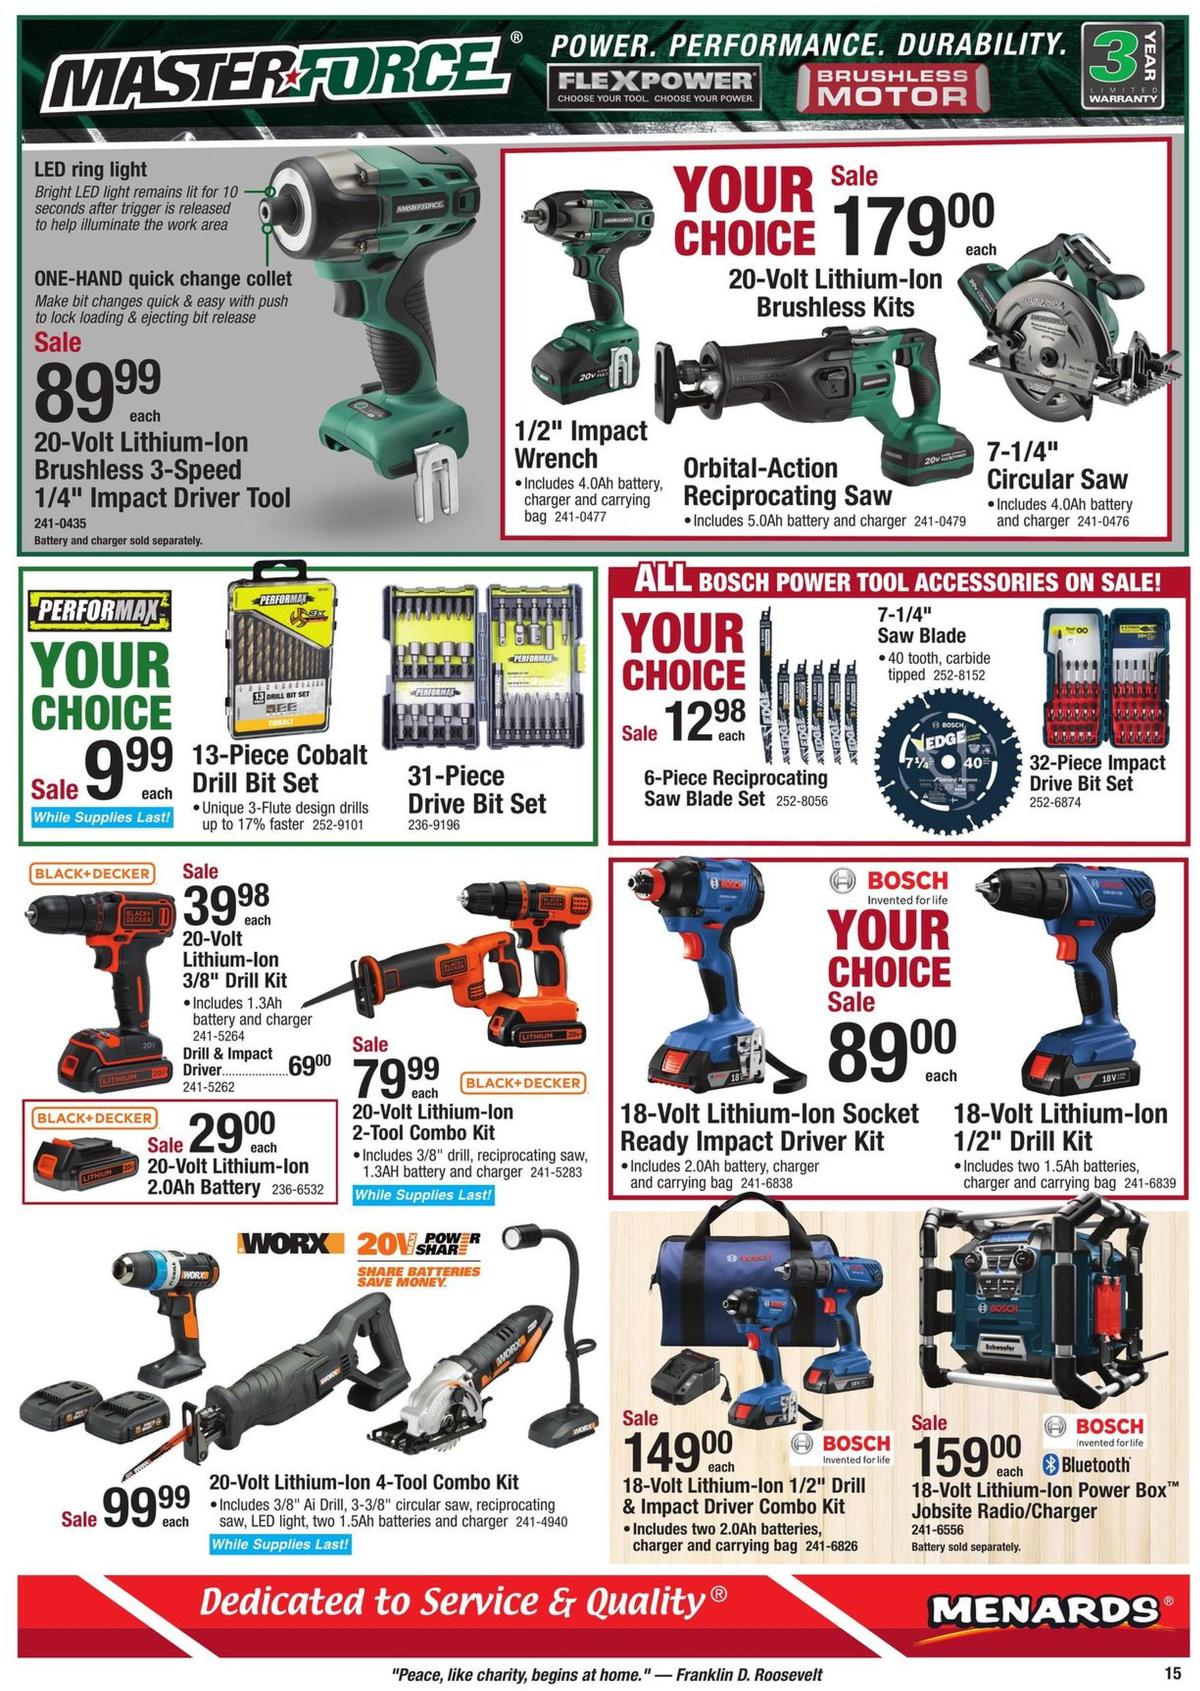 Menards Christmas Catalog Weekly Ads & Special Buys from November 24